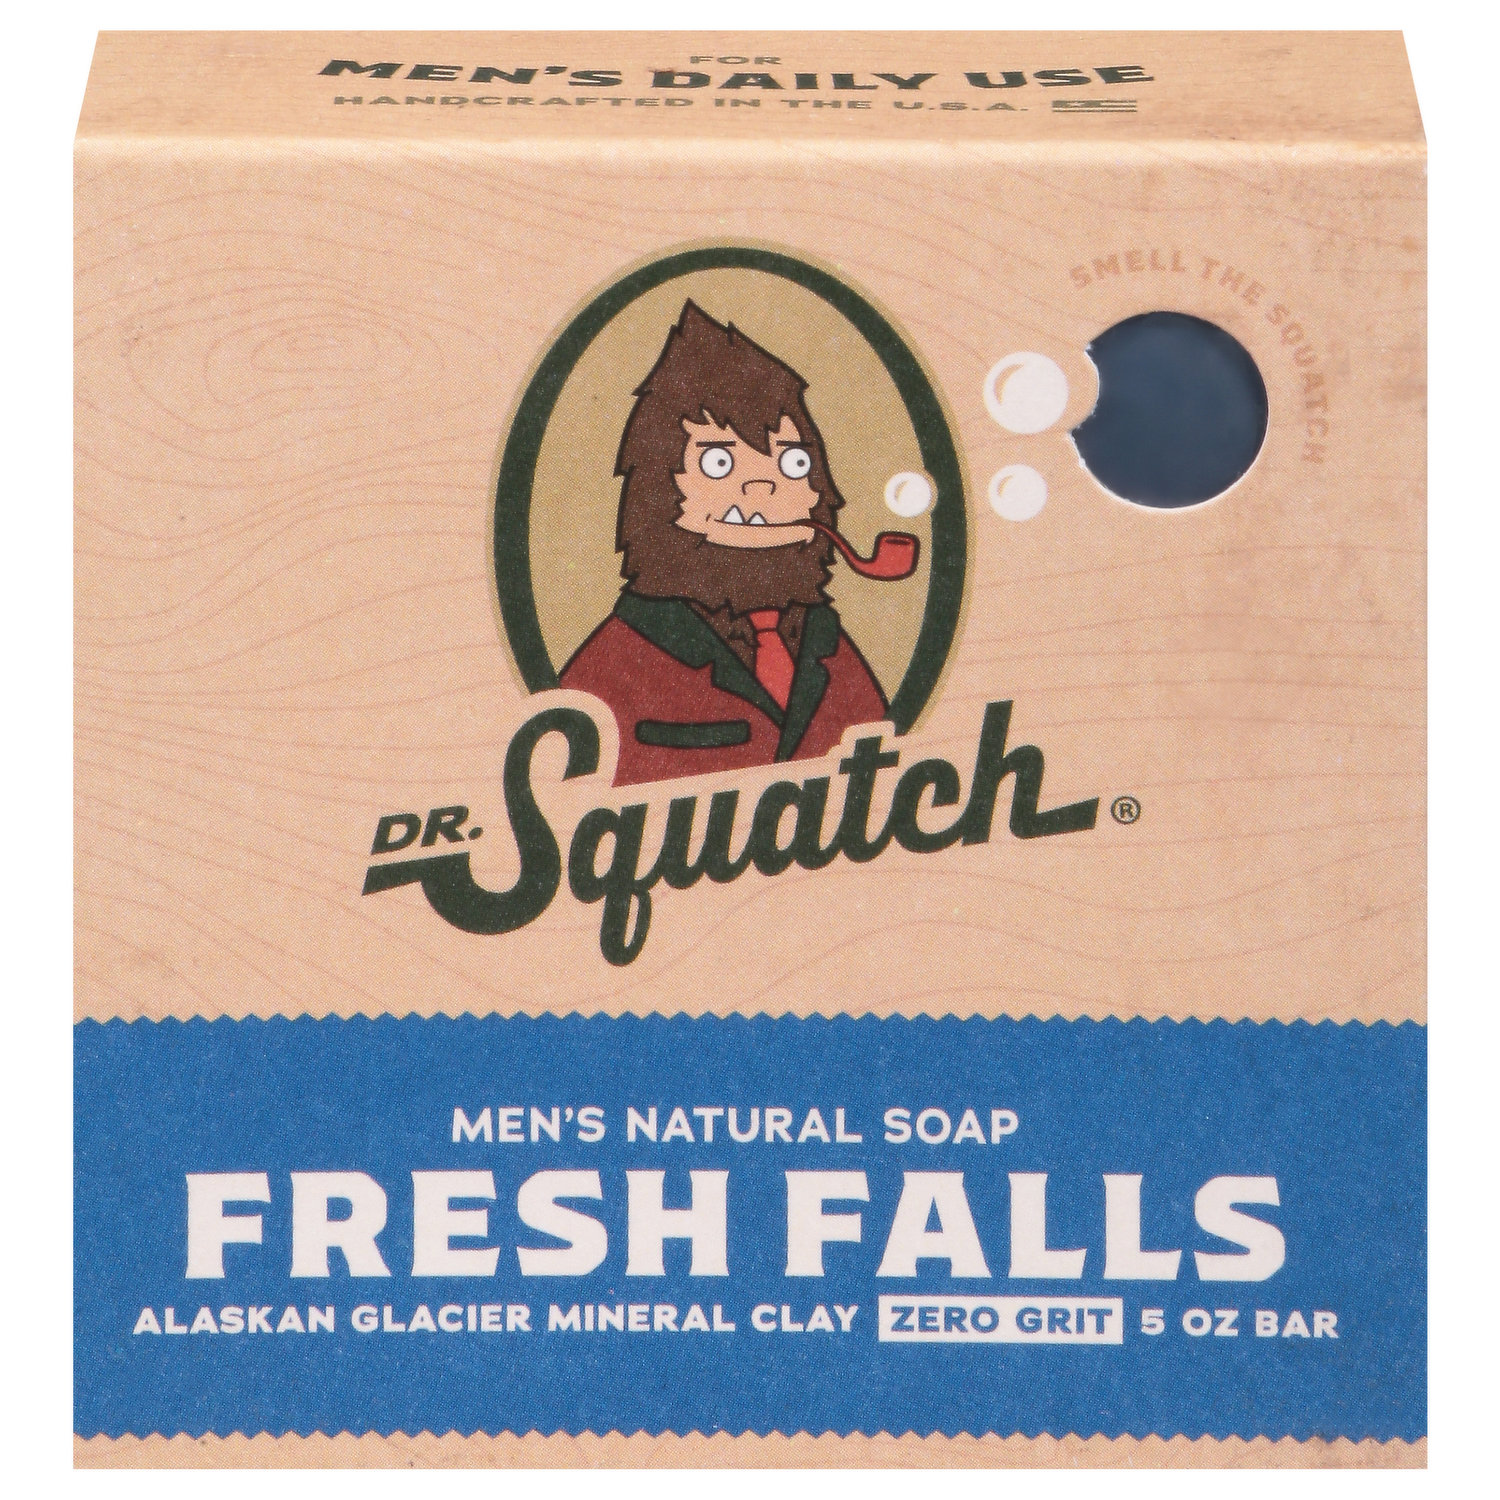 Dr. Squatch - Feel the arctic breeze as you lather up with this